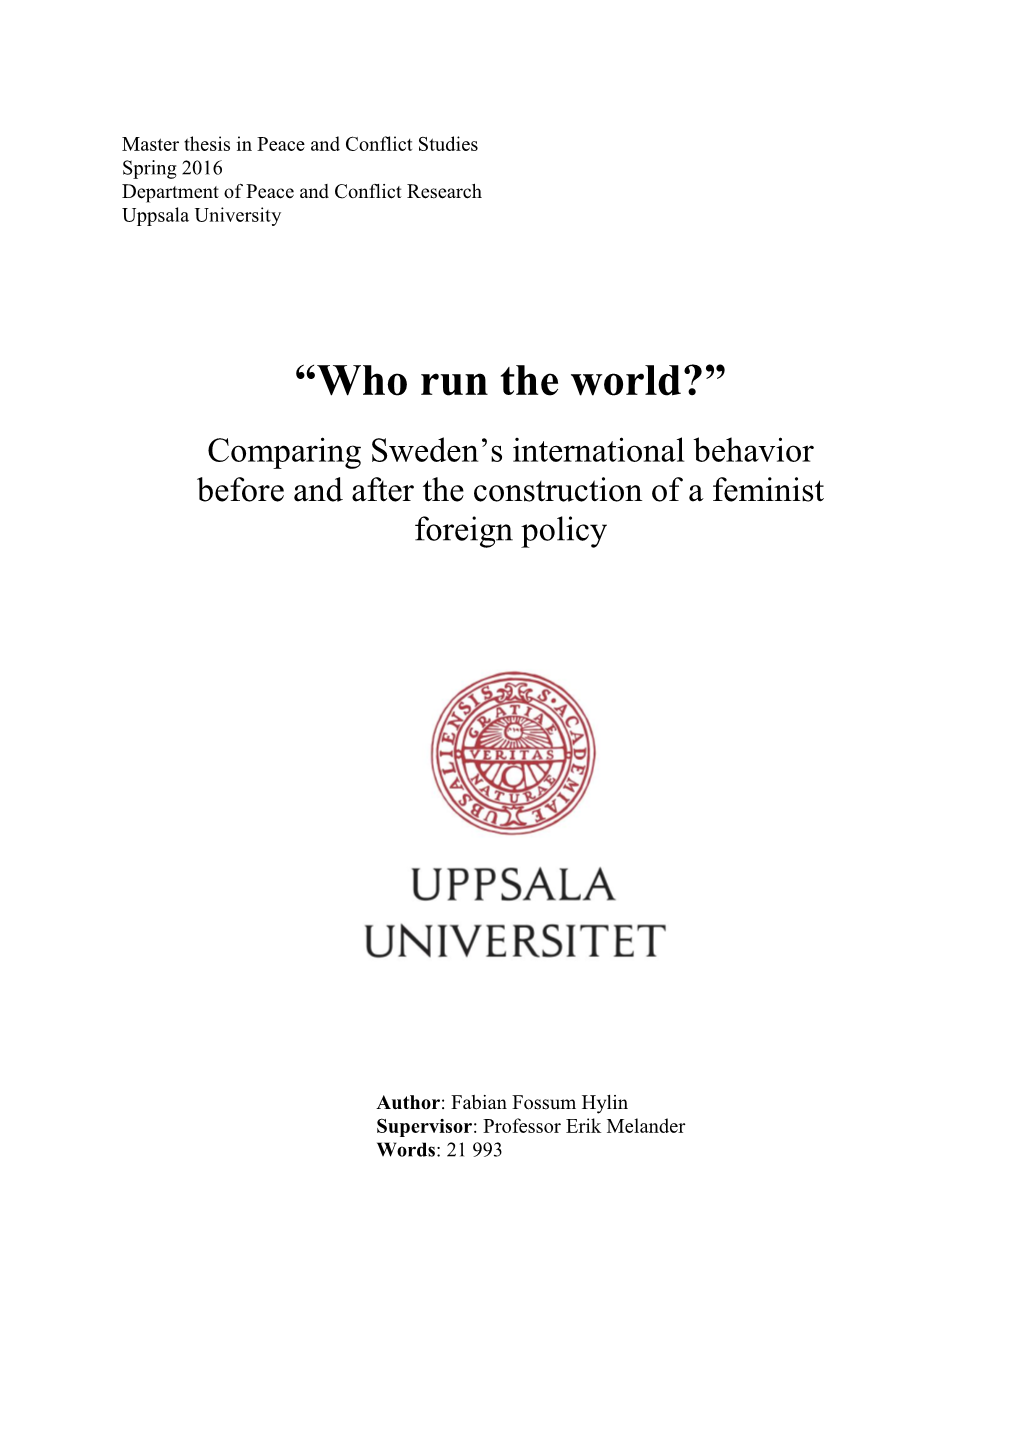 “Who Run the World?” Comparing Sweden’S International Behavior Before and After the Construction of a Feminist Foreign Policy